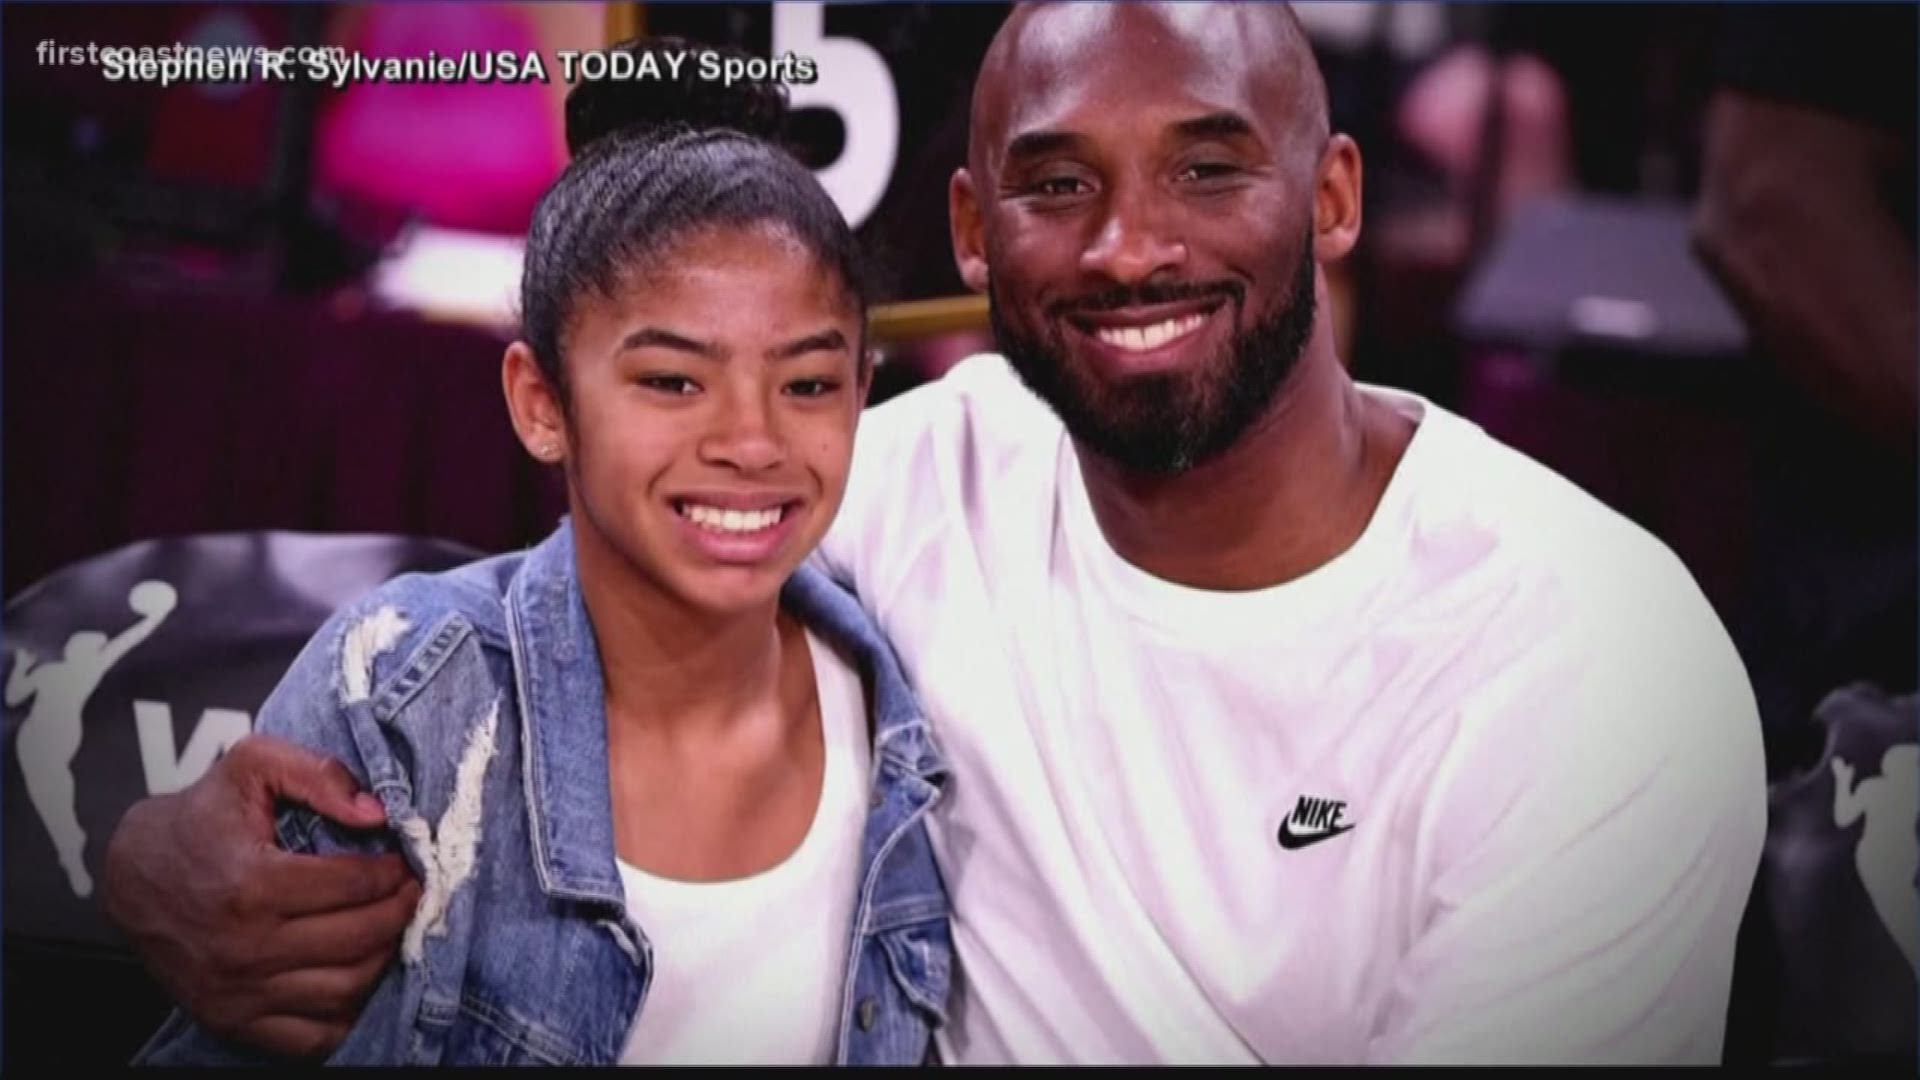 Kobe Bryant, who won five NBA championships with the Los Angeles Lakers, and his 13-year-old daughter died Sunday in a helicopter crash.